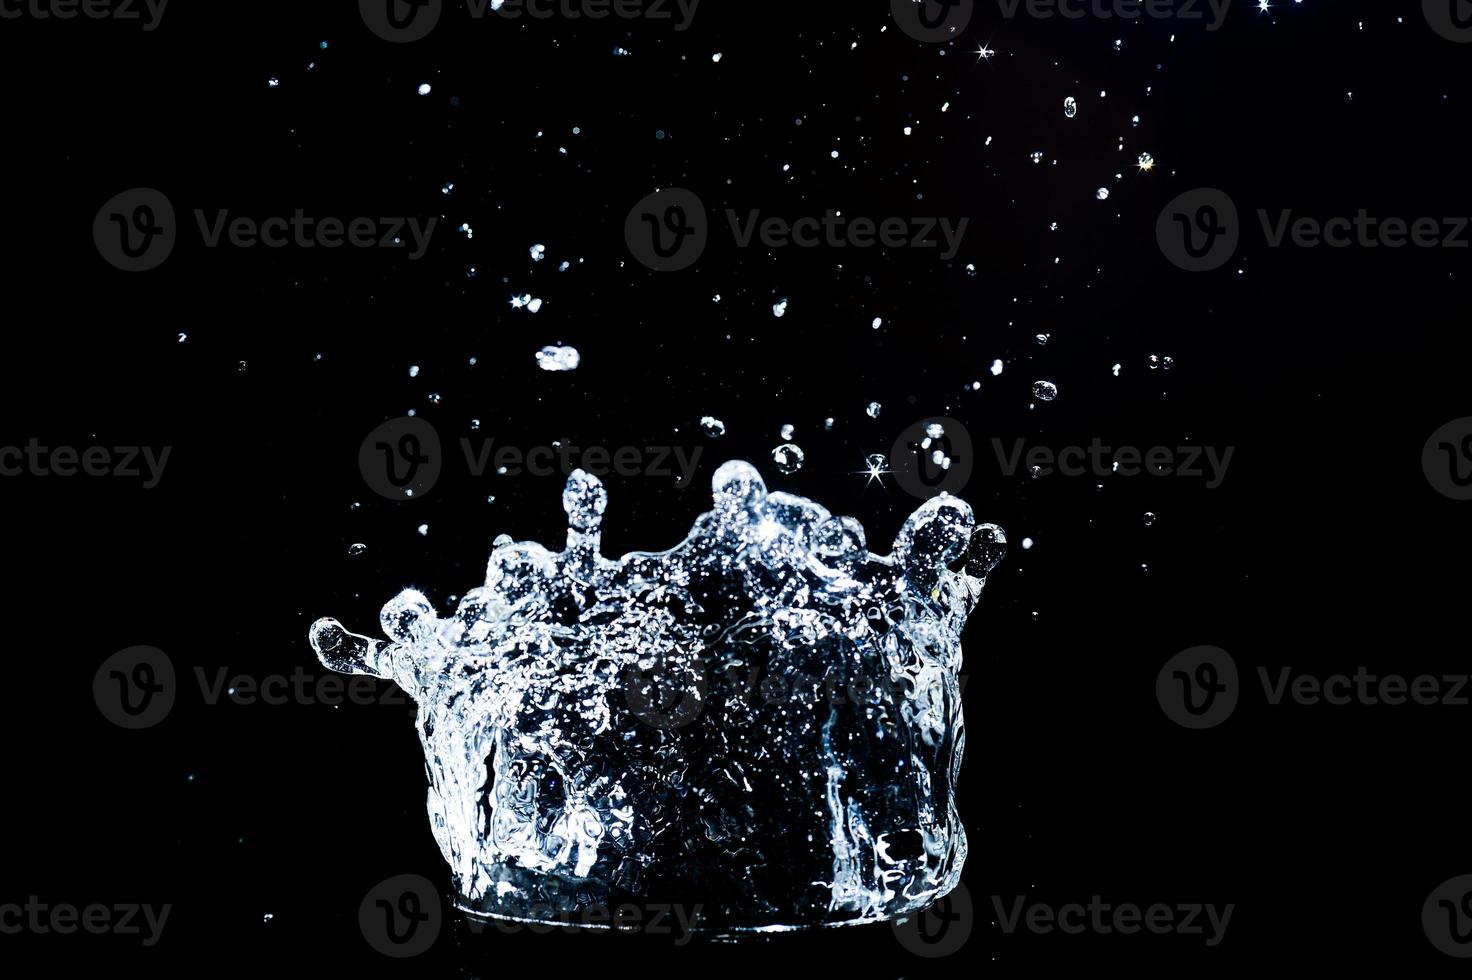 Scattered water splashes on a black background. water splash isolated on the black background photo